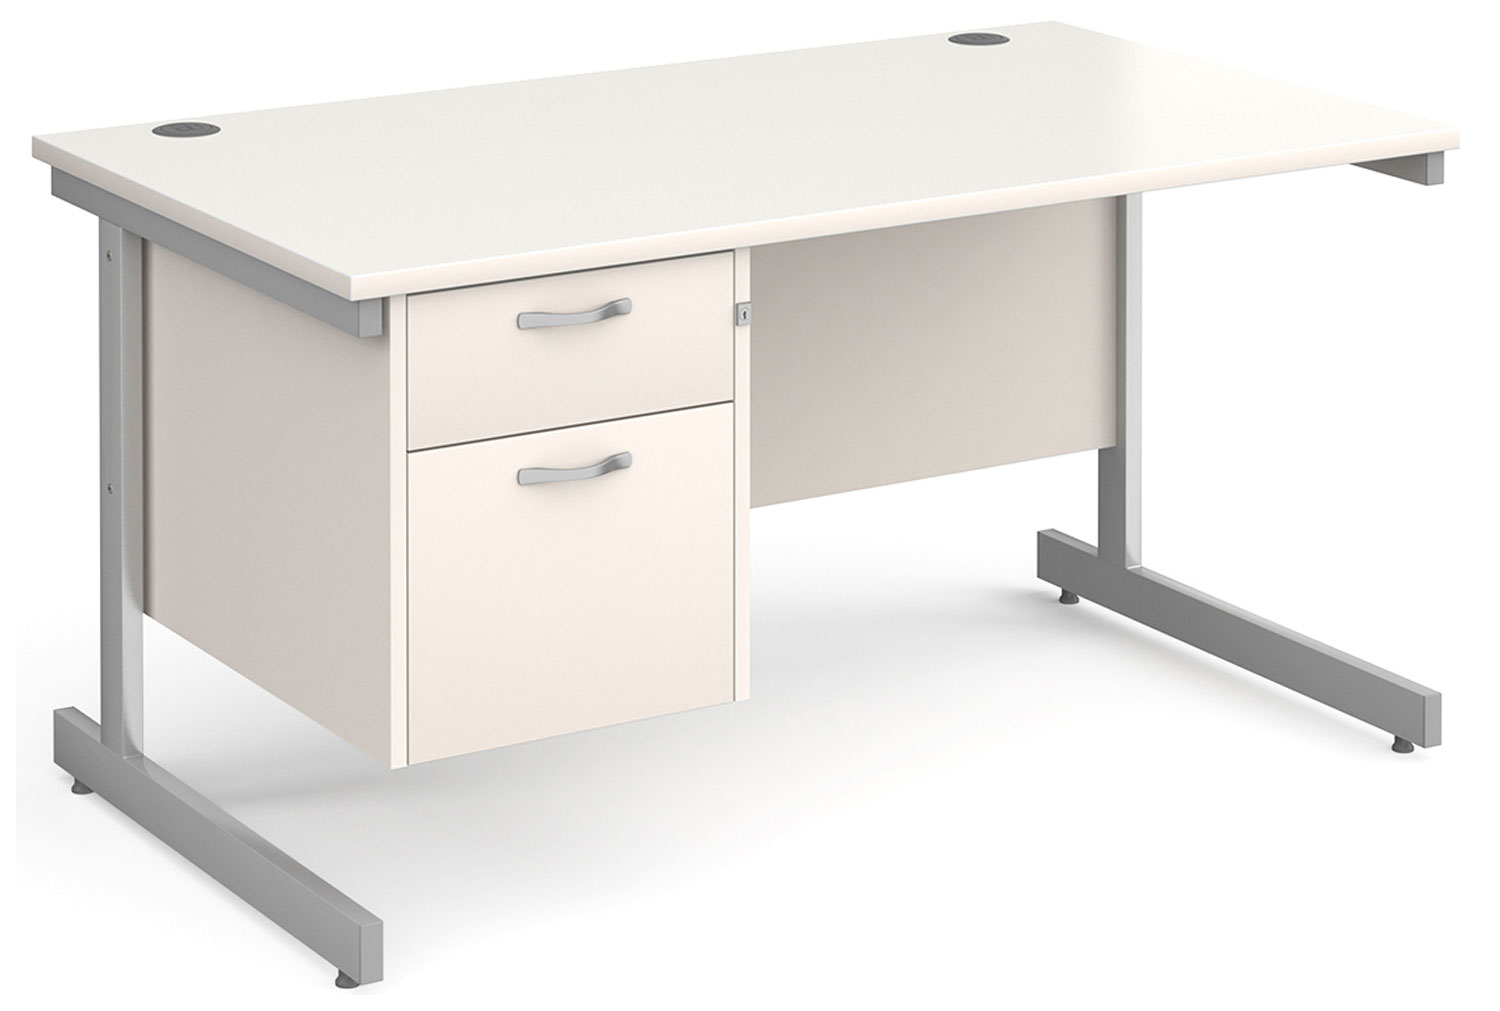 All White C-Leg Clerical Office Desk 2 Drawer, 140wx80dx73h (cm), Express Delivery